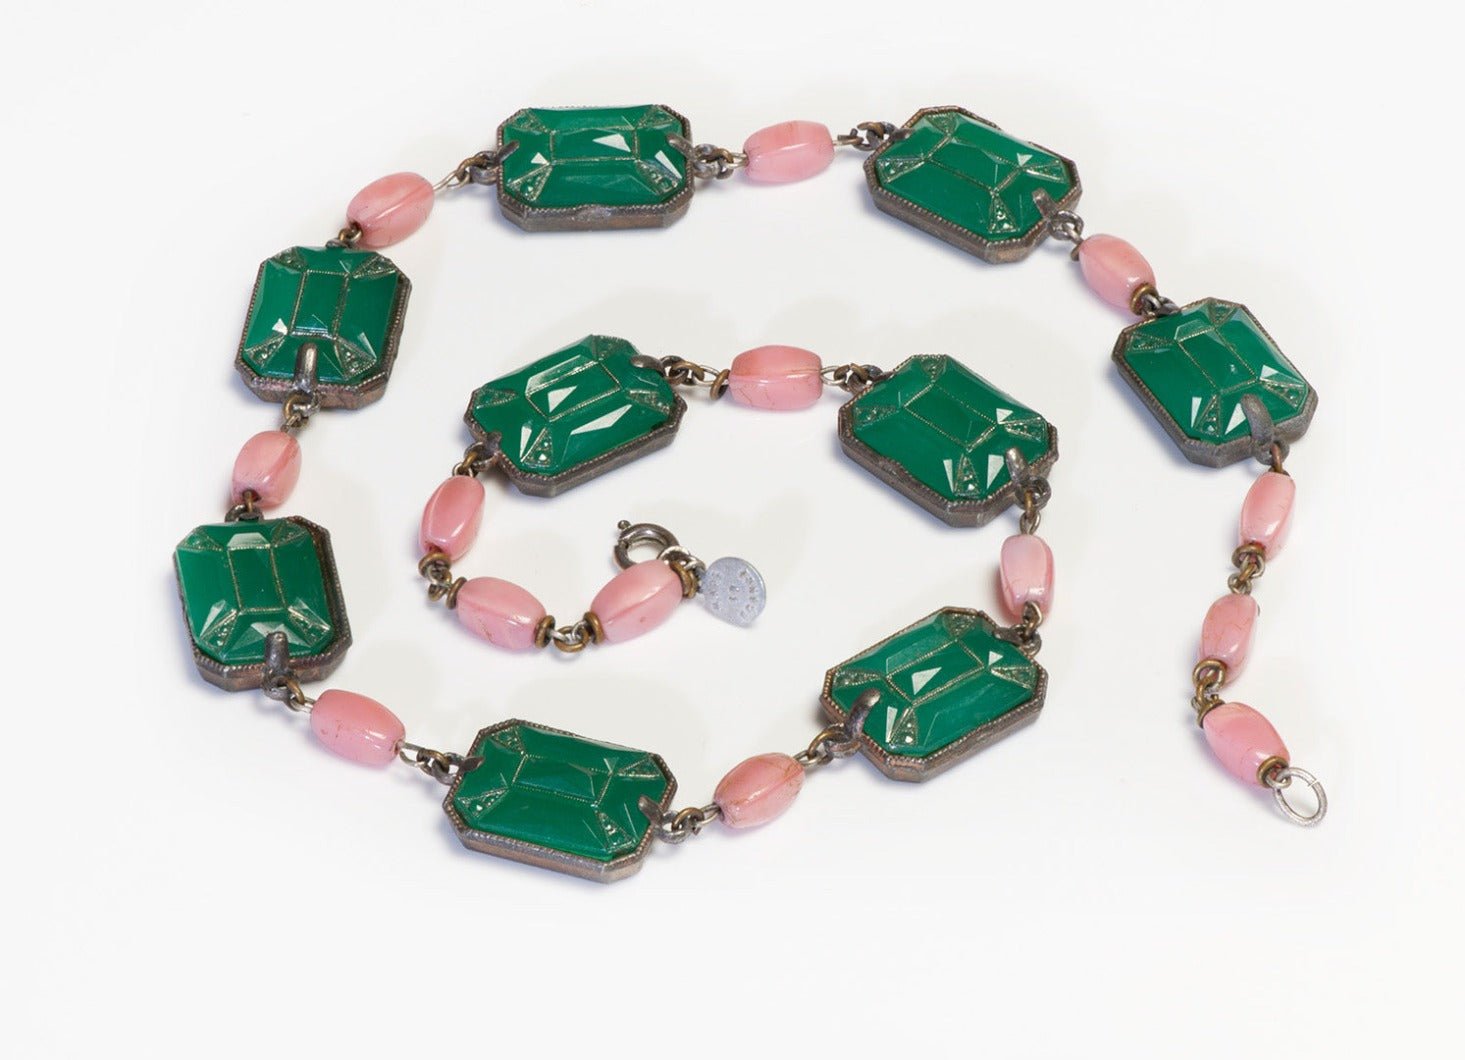 Vintage French Art Deco Style Green Carved Glass Pink Beads Collar Necklace